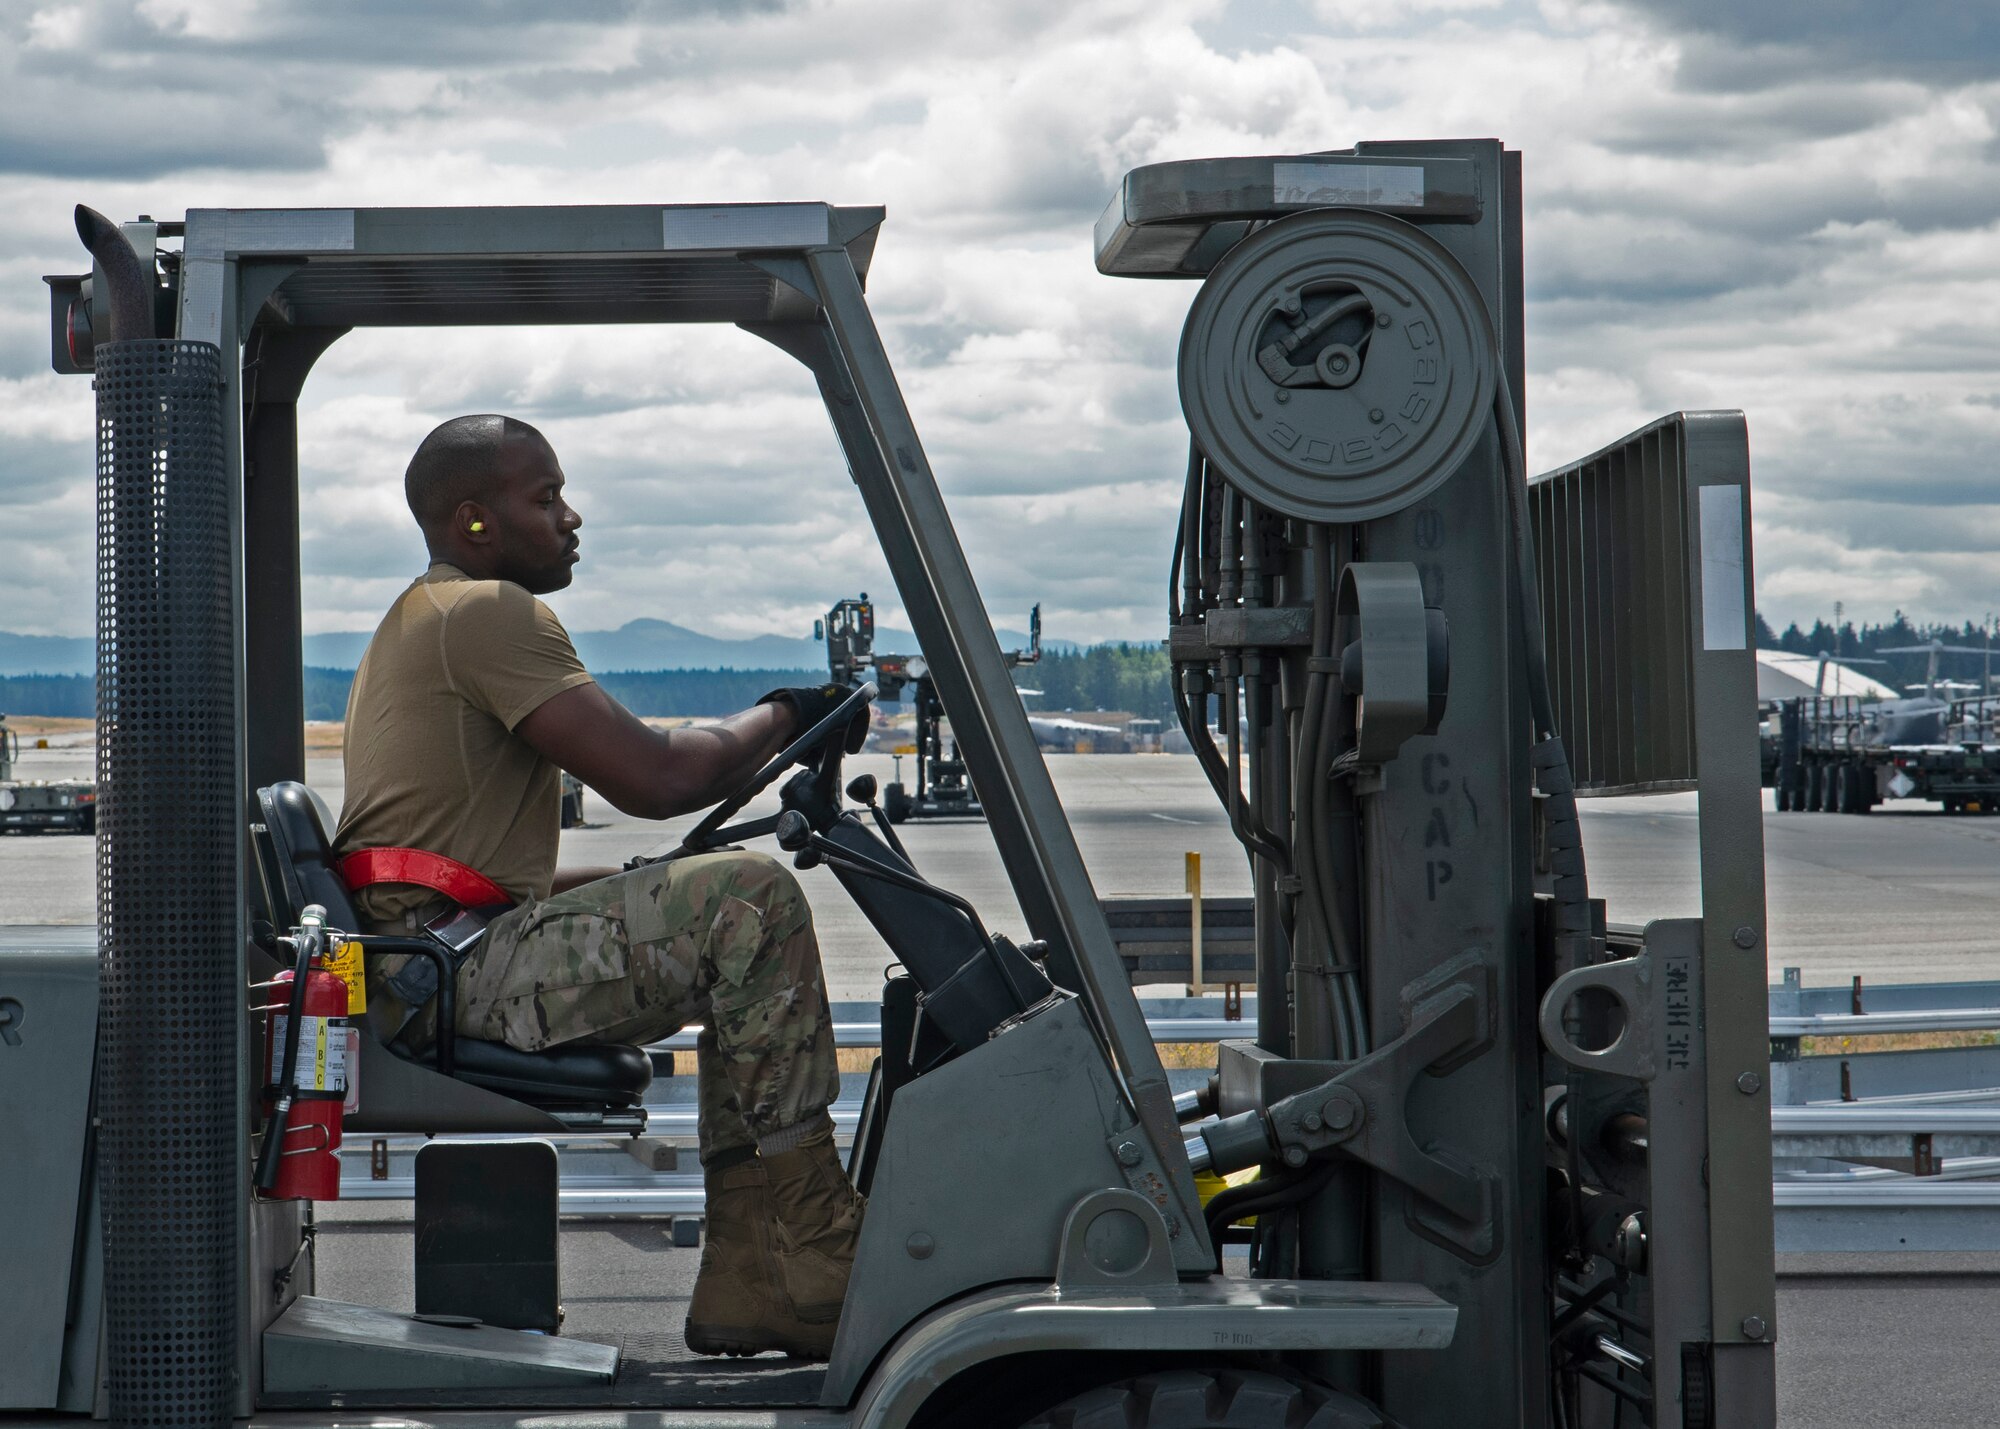 U.S. Air Force Staff Sgt. Wesley Valentine, passenger service supervisor with the 62nd Aerial Port Squadron, operates a forklift during a 10K forklift skills course training at Joint Base Lewis-McChord, Washington, July 21, 2021. Valentine, along with the other six Airmen on his team, will compete in the 2021 Pacific Air Forces (PACAF) Port Dawg Rodeo at Joint Base Pearl Harbor-Hickam, Hawaii, in August. (U.S. Air Force photo by Senior Airman Zoe Thacker)